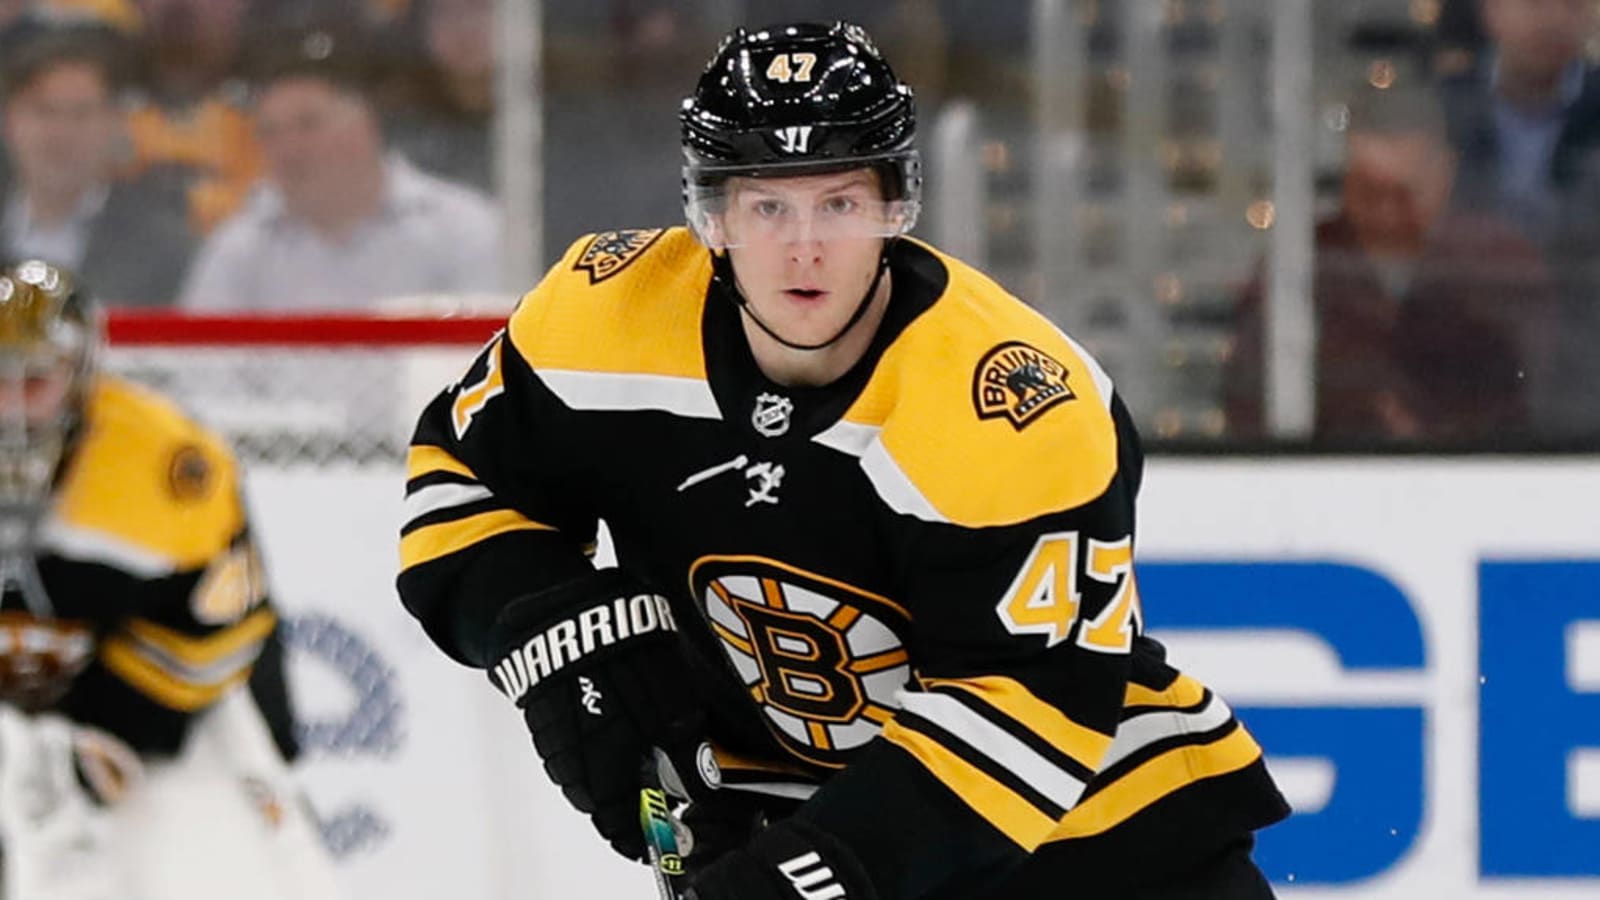 What does future hold for Torey Krug?